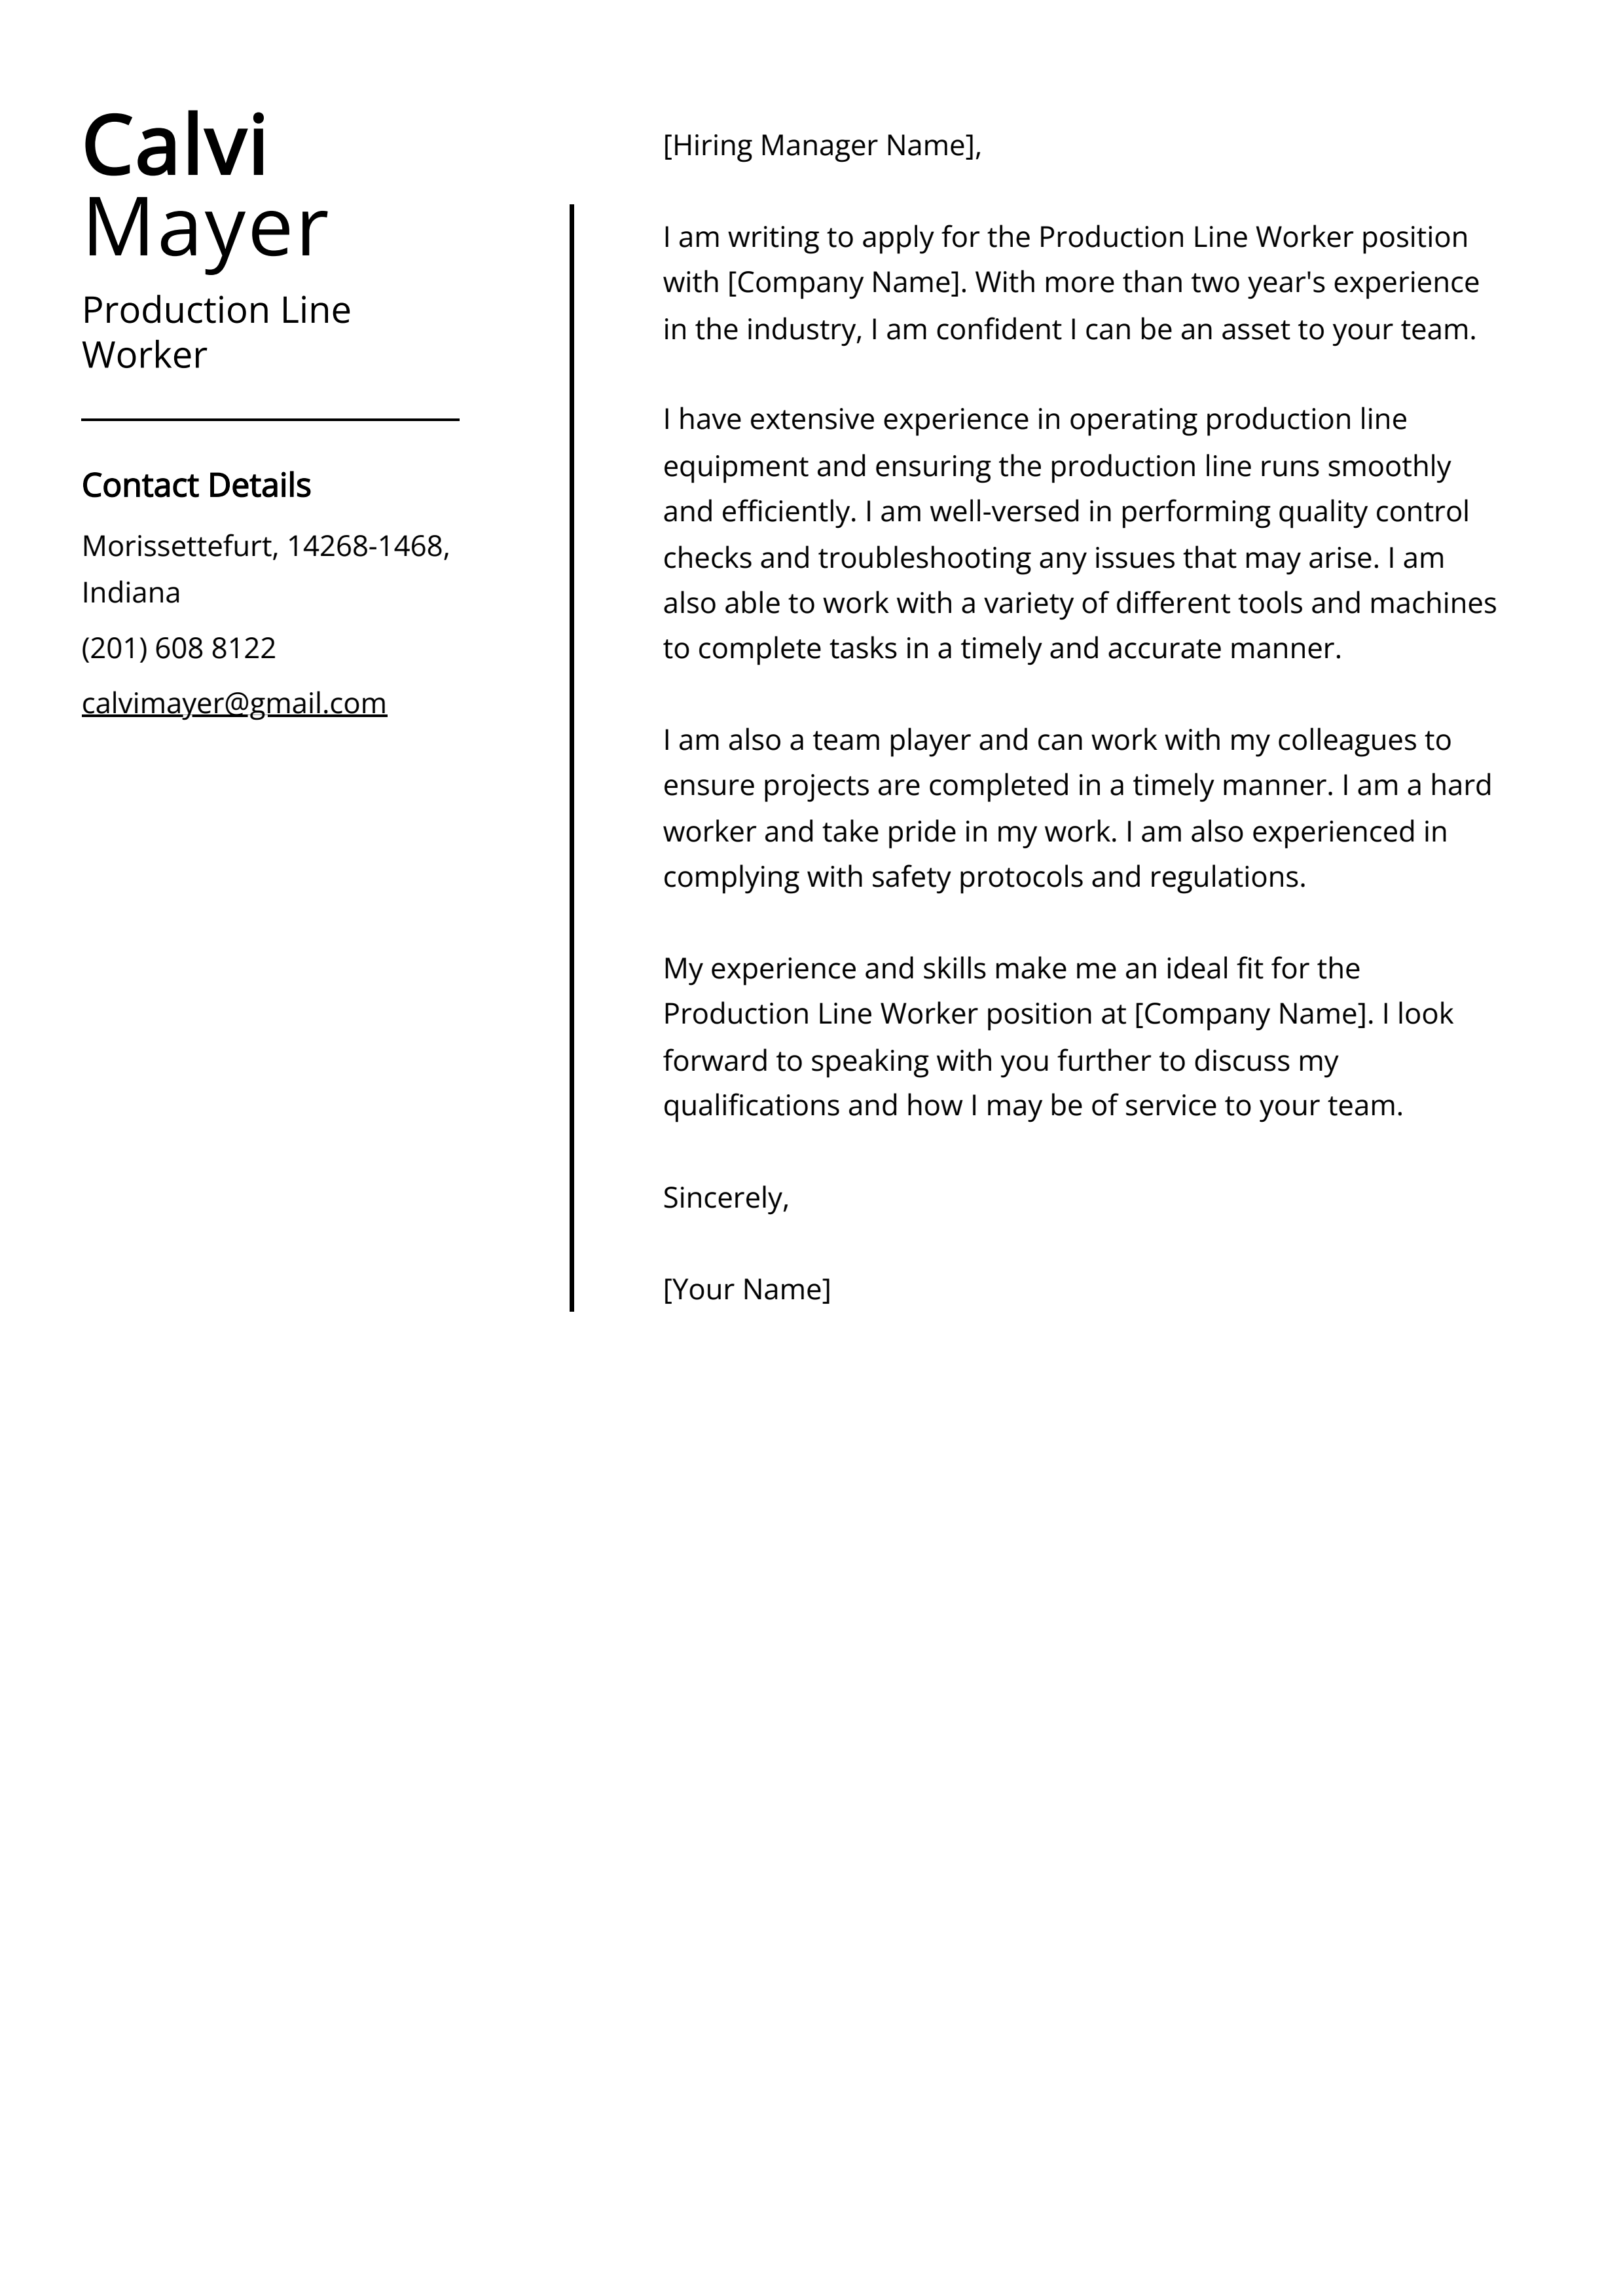 Production Line Worker Cover Letter Example